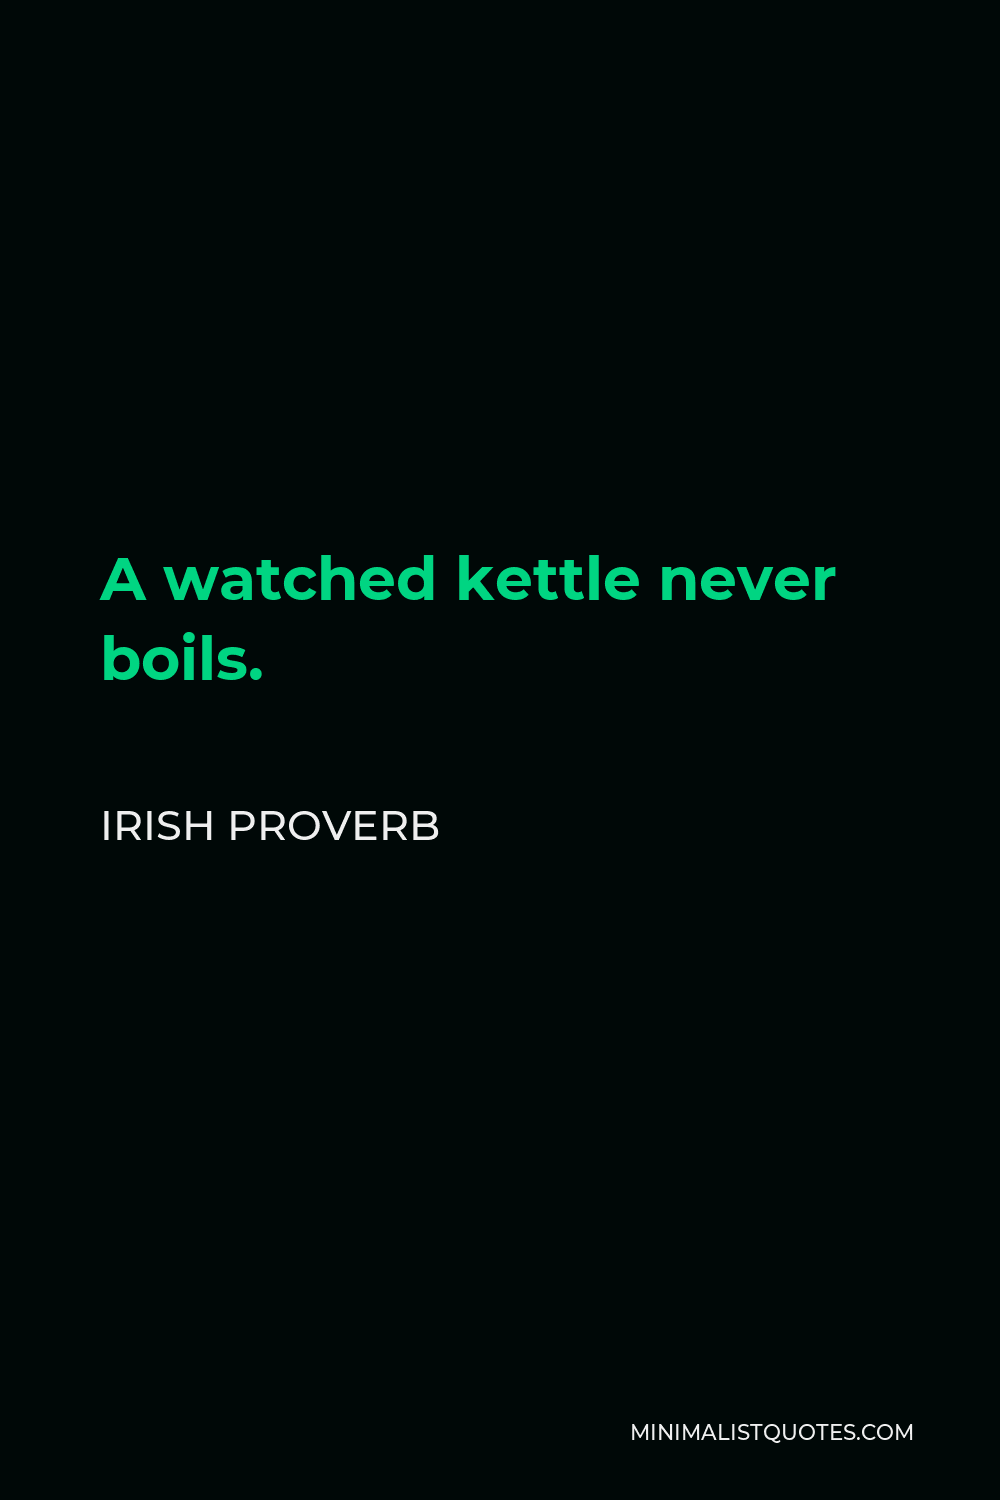 Irish Proverb Quote - A watched kettle never boils.